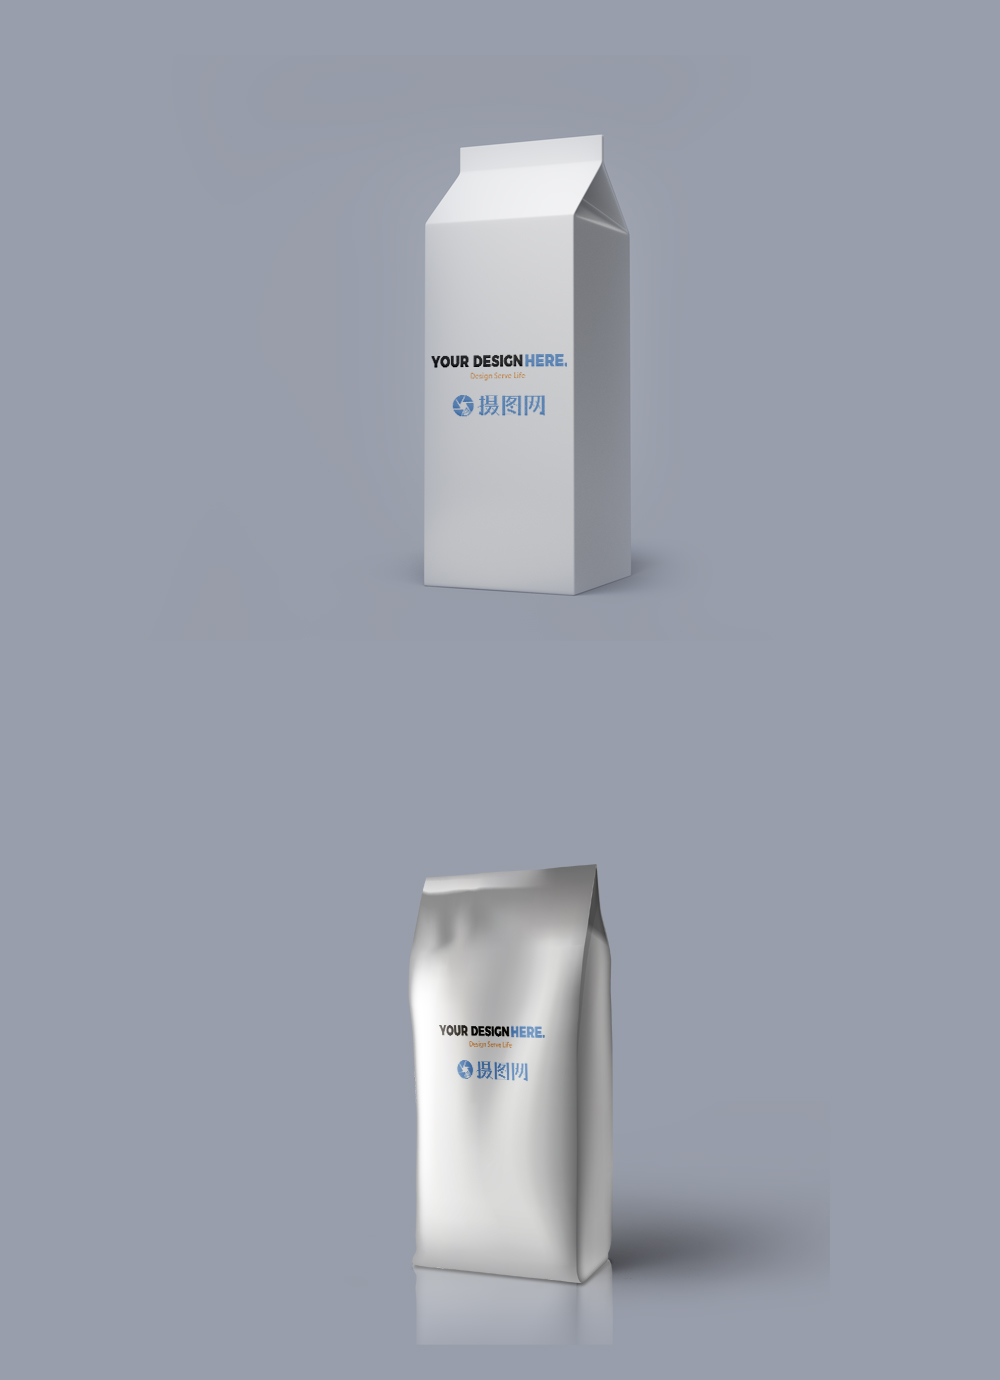 Packaging mockup template image_picture free download 400735162_lovepik.com